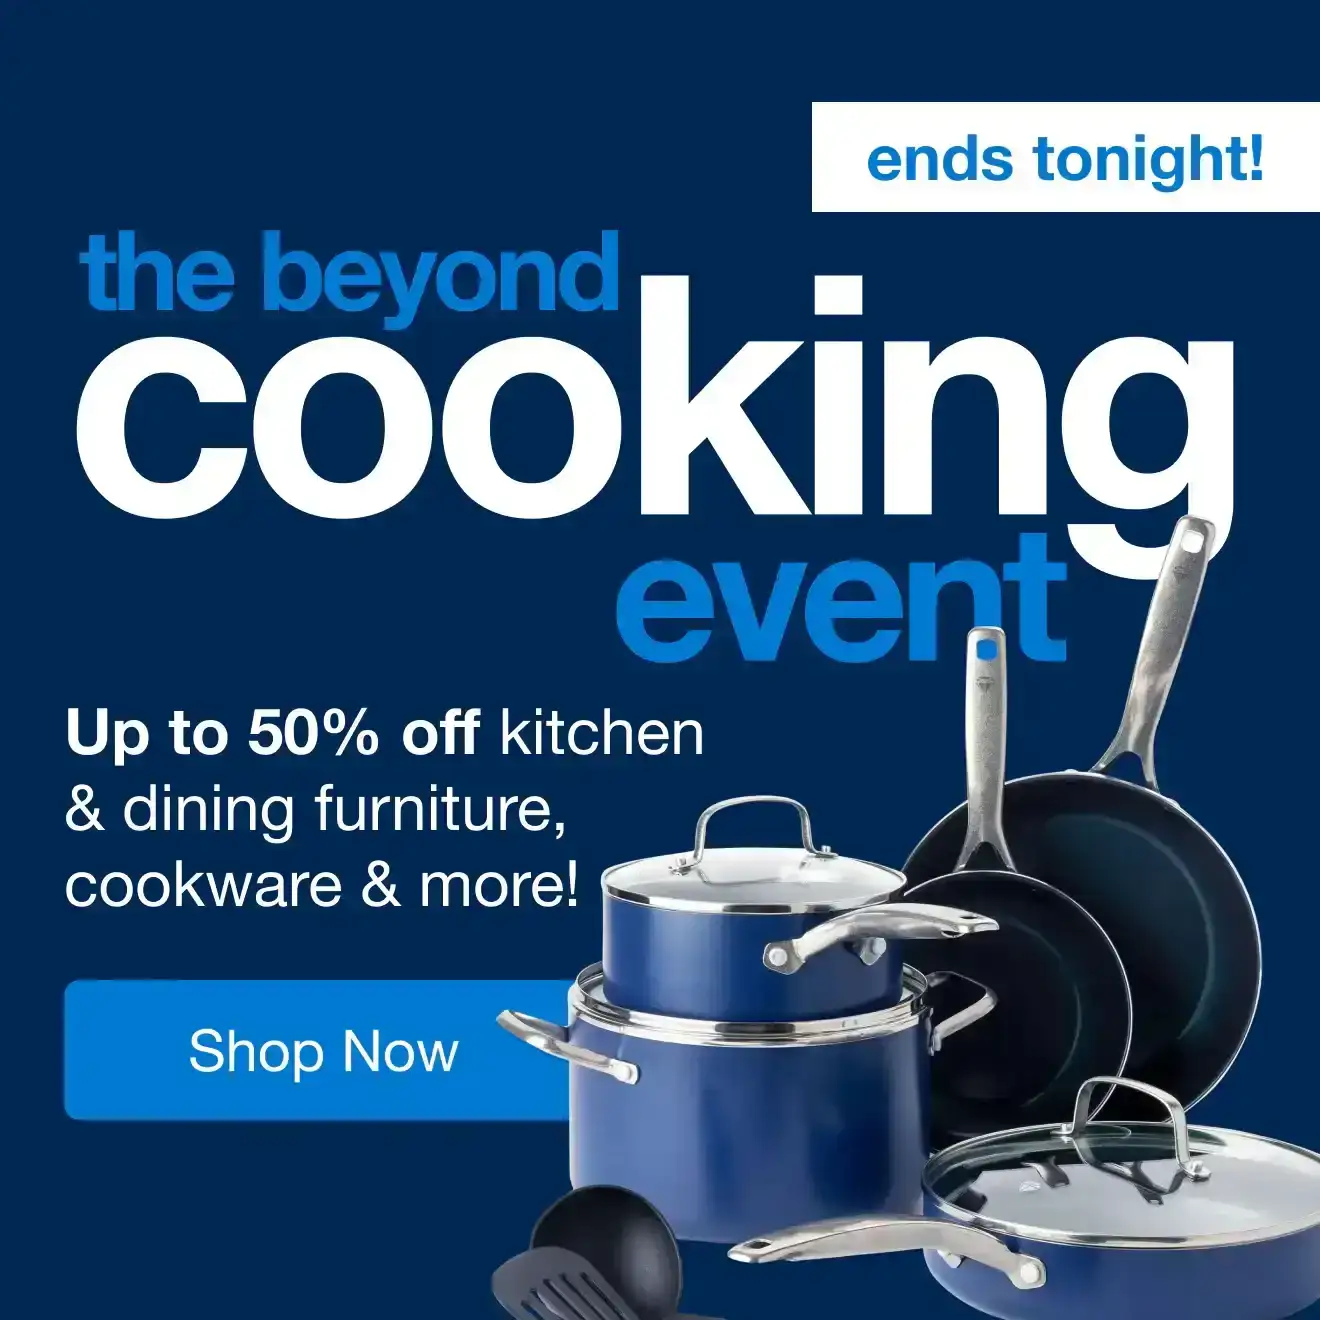 The Beyond Cooking Event Ends Tonight — Shop Now!